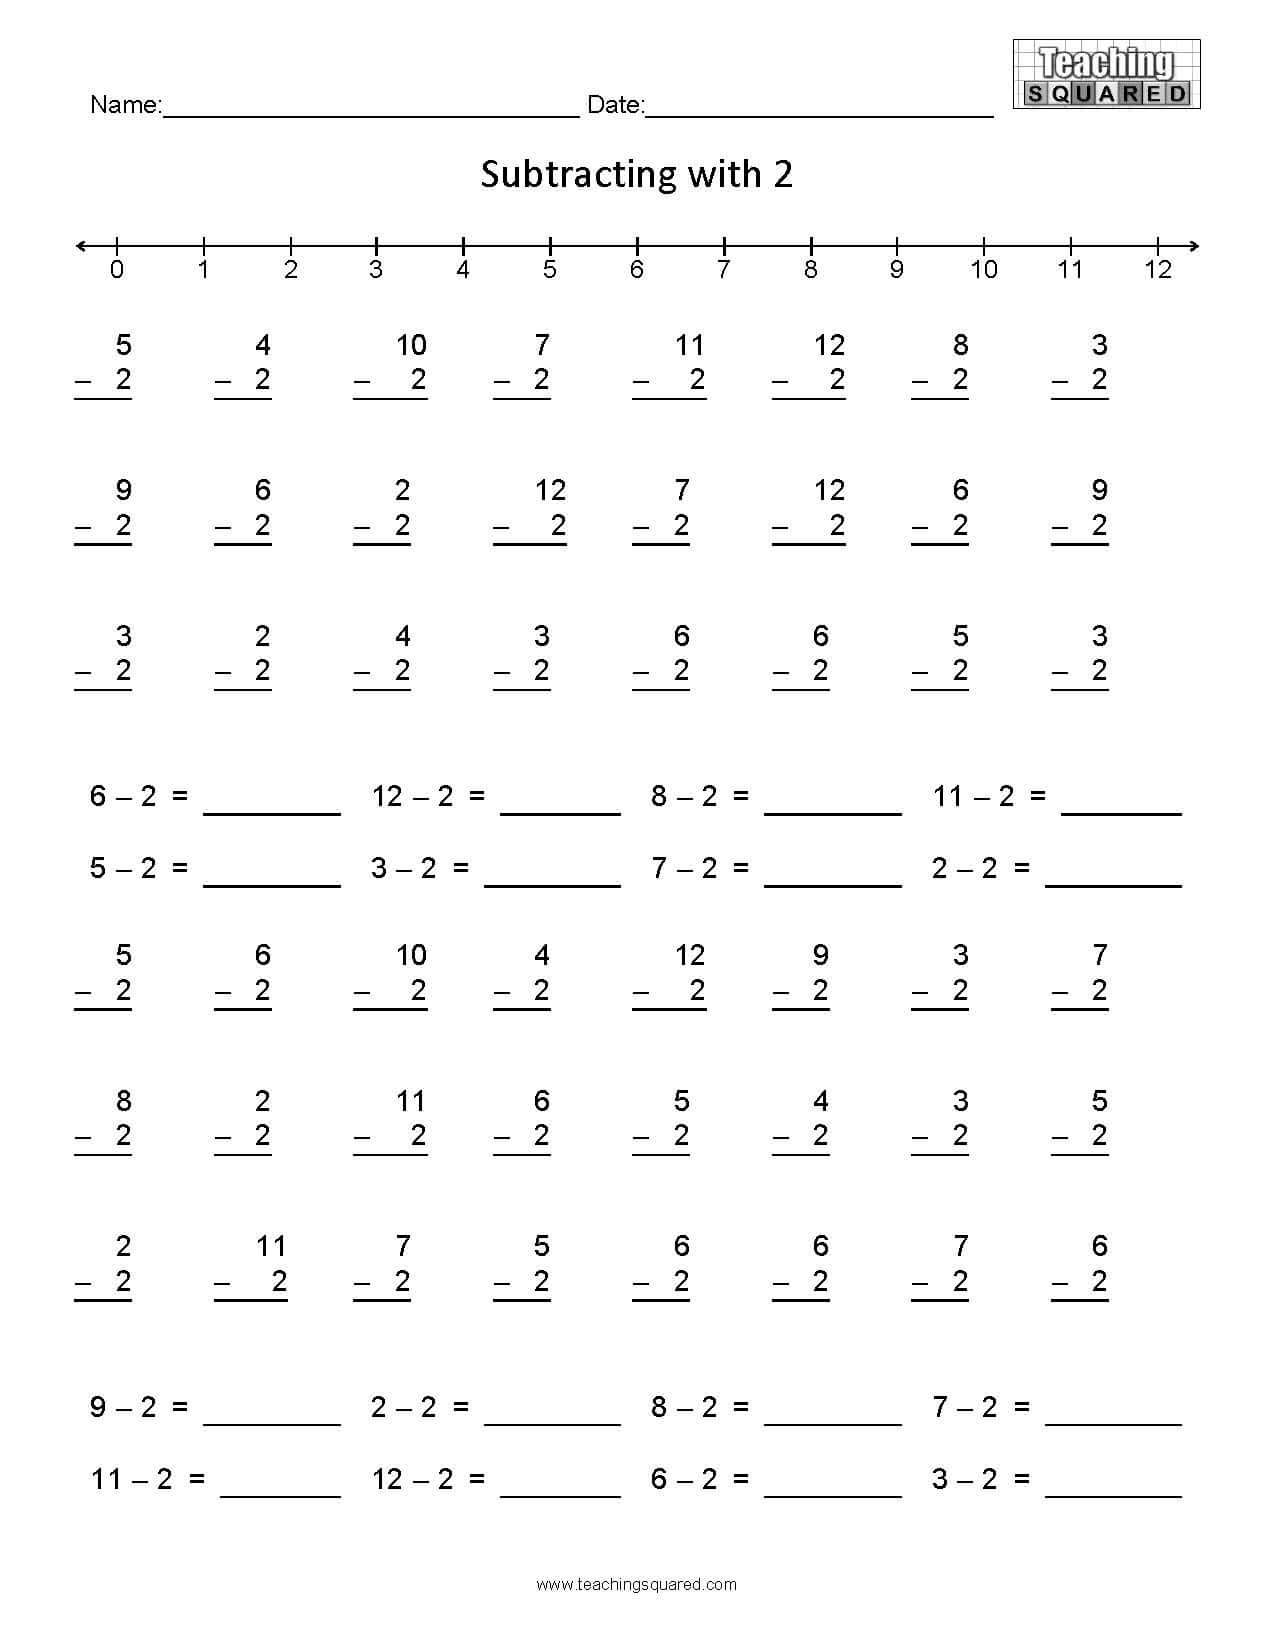 Learning Subtraction- Minus 2 teaching and homeschool worksheets